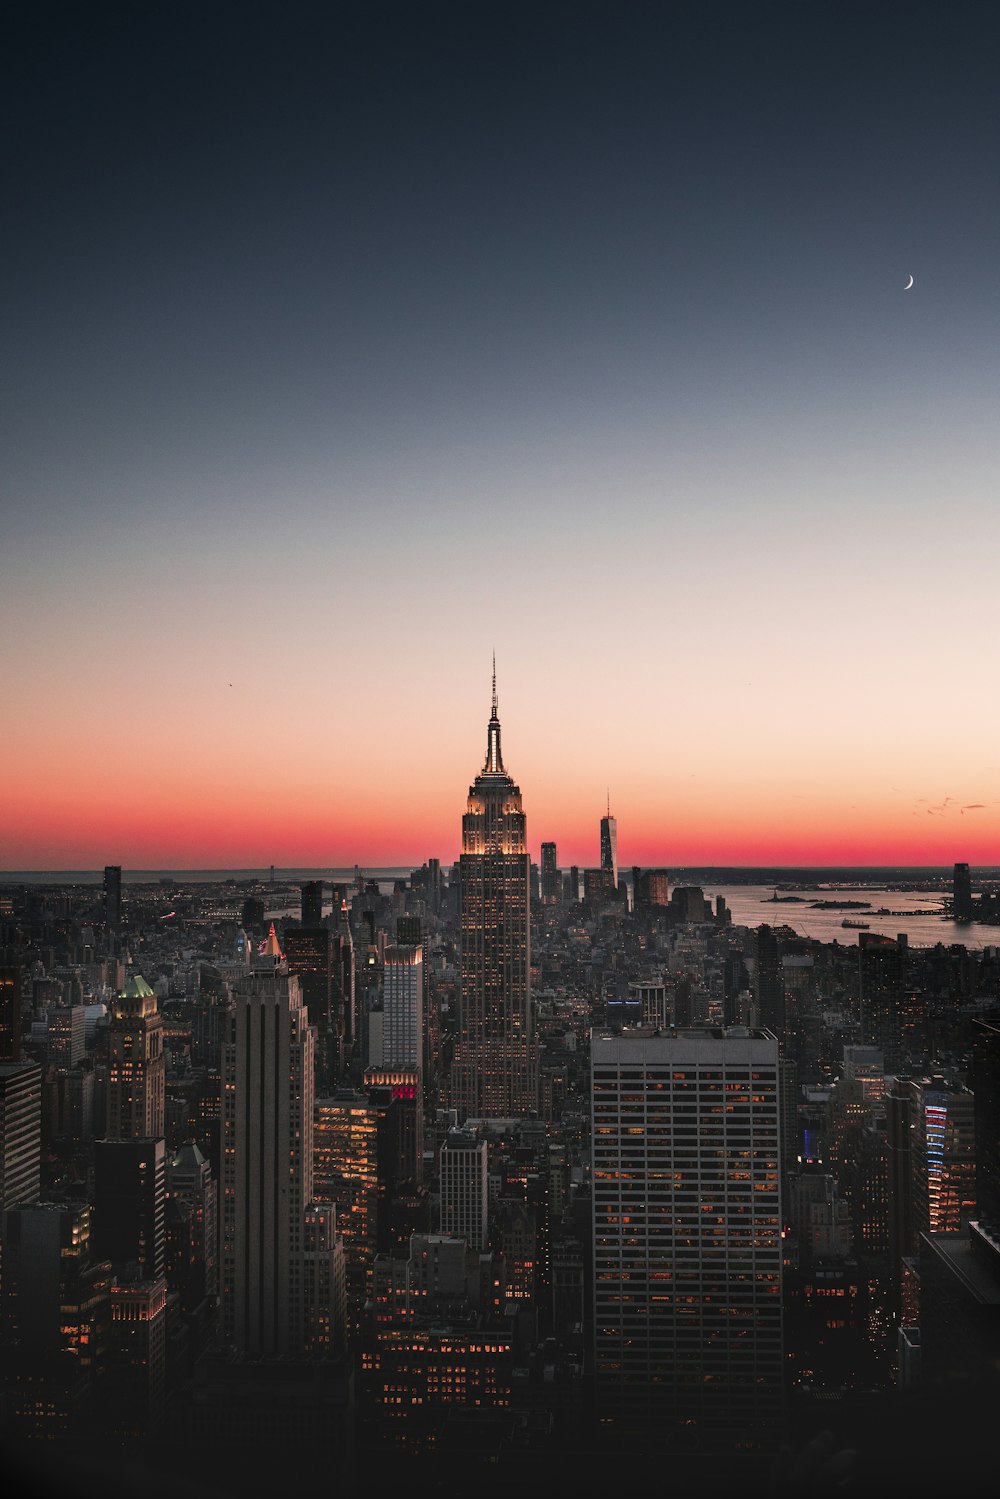 750+ New York Night Pictures | Download Free Images on Unsplash